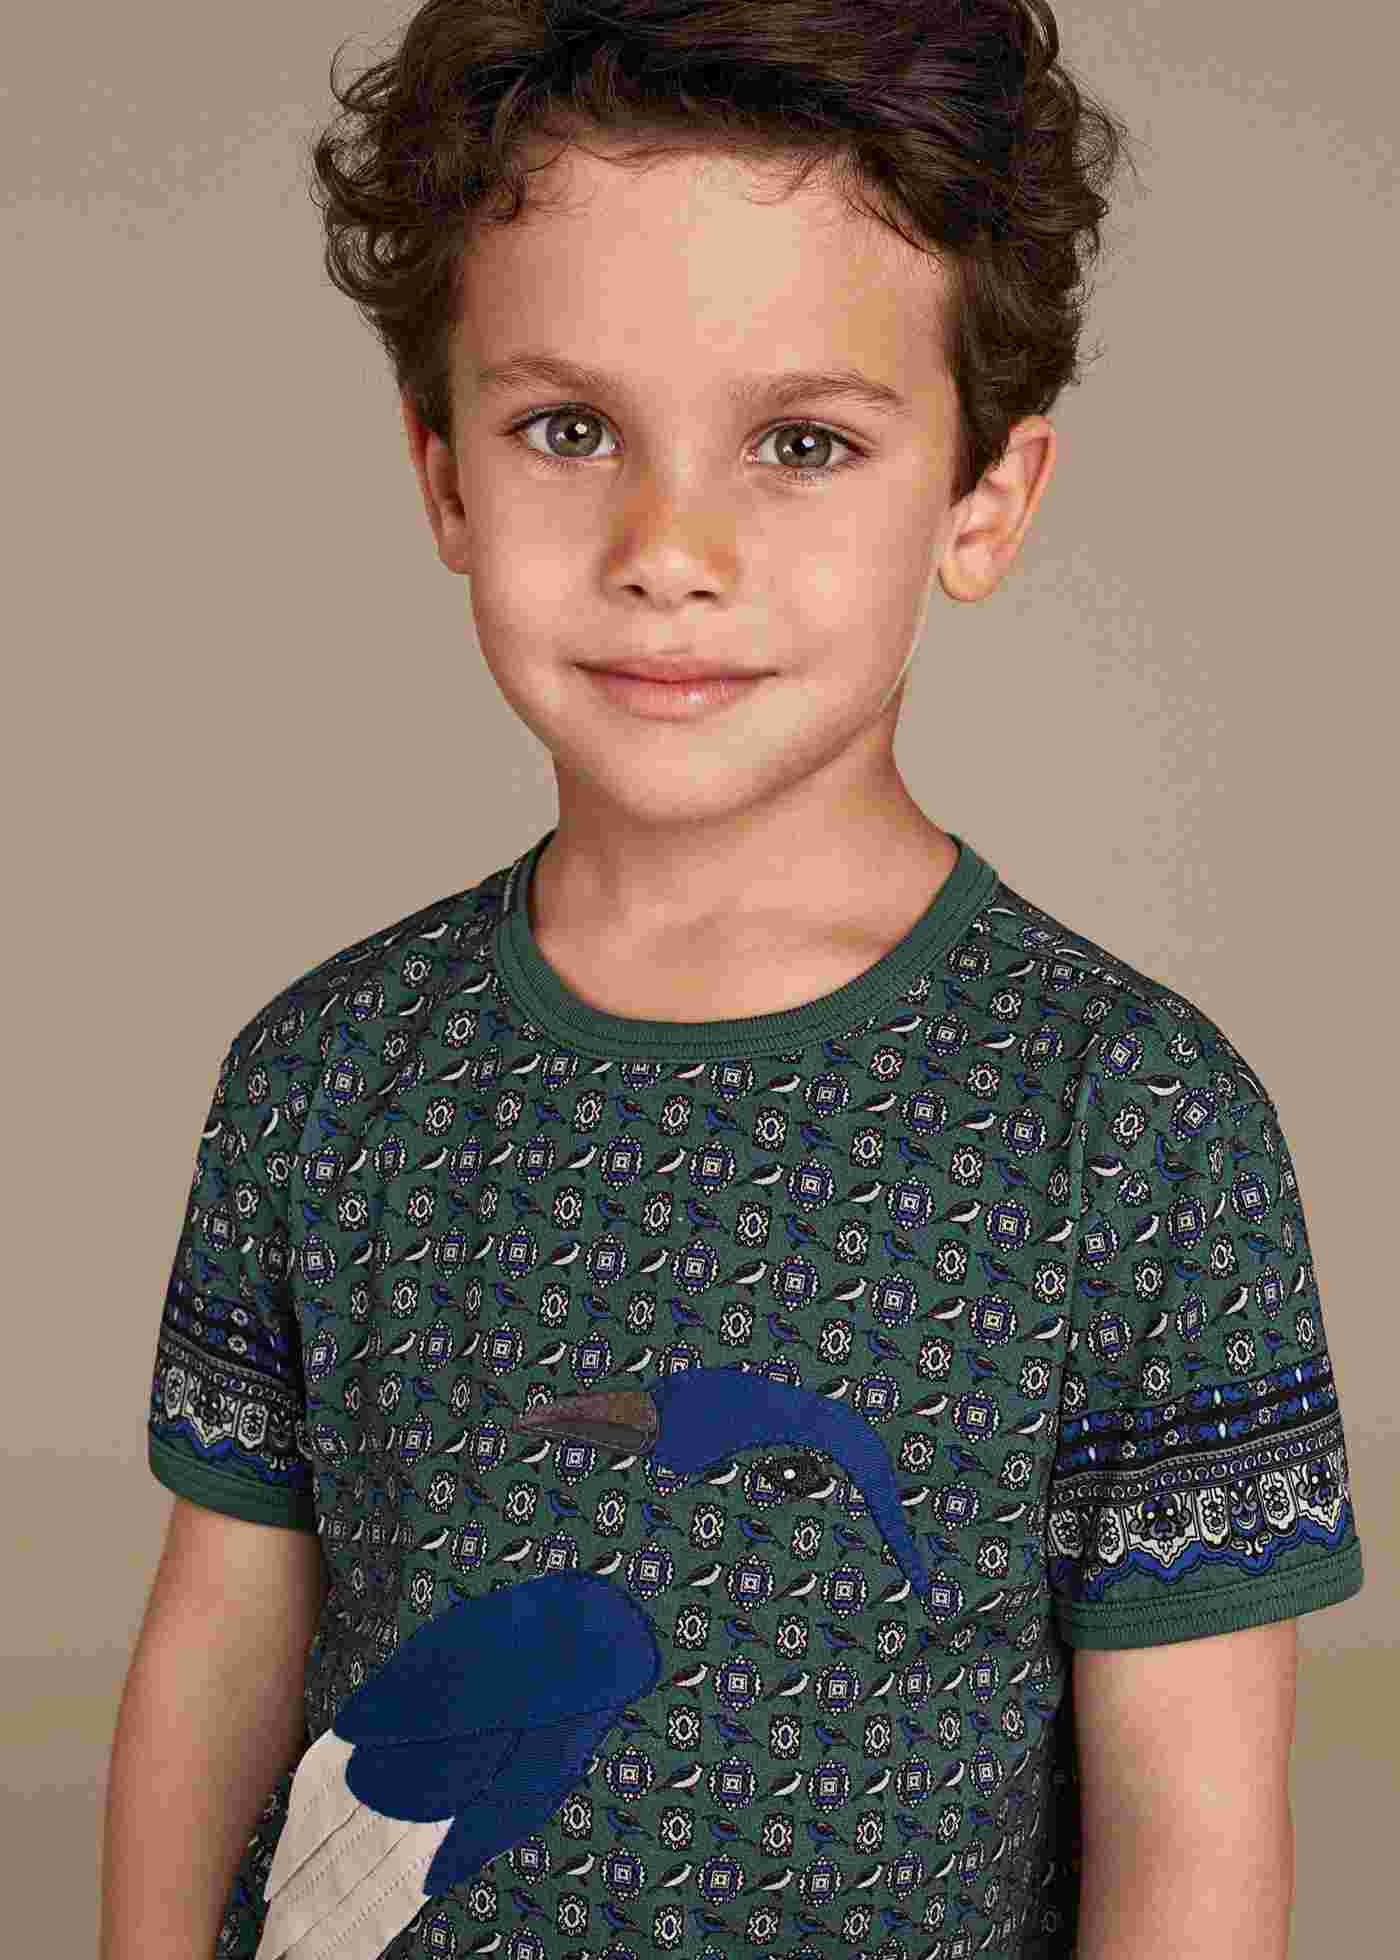 Boy With Locked Kids Hairstyle Idea Short Over Ears